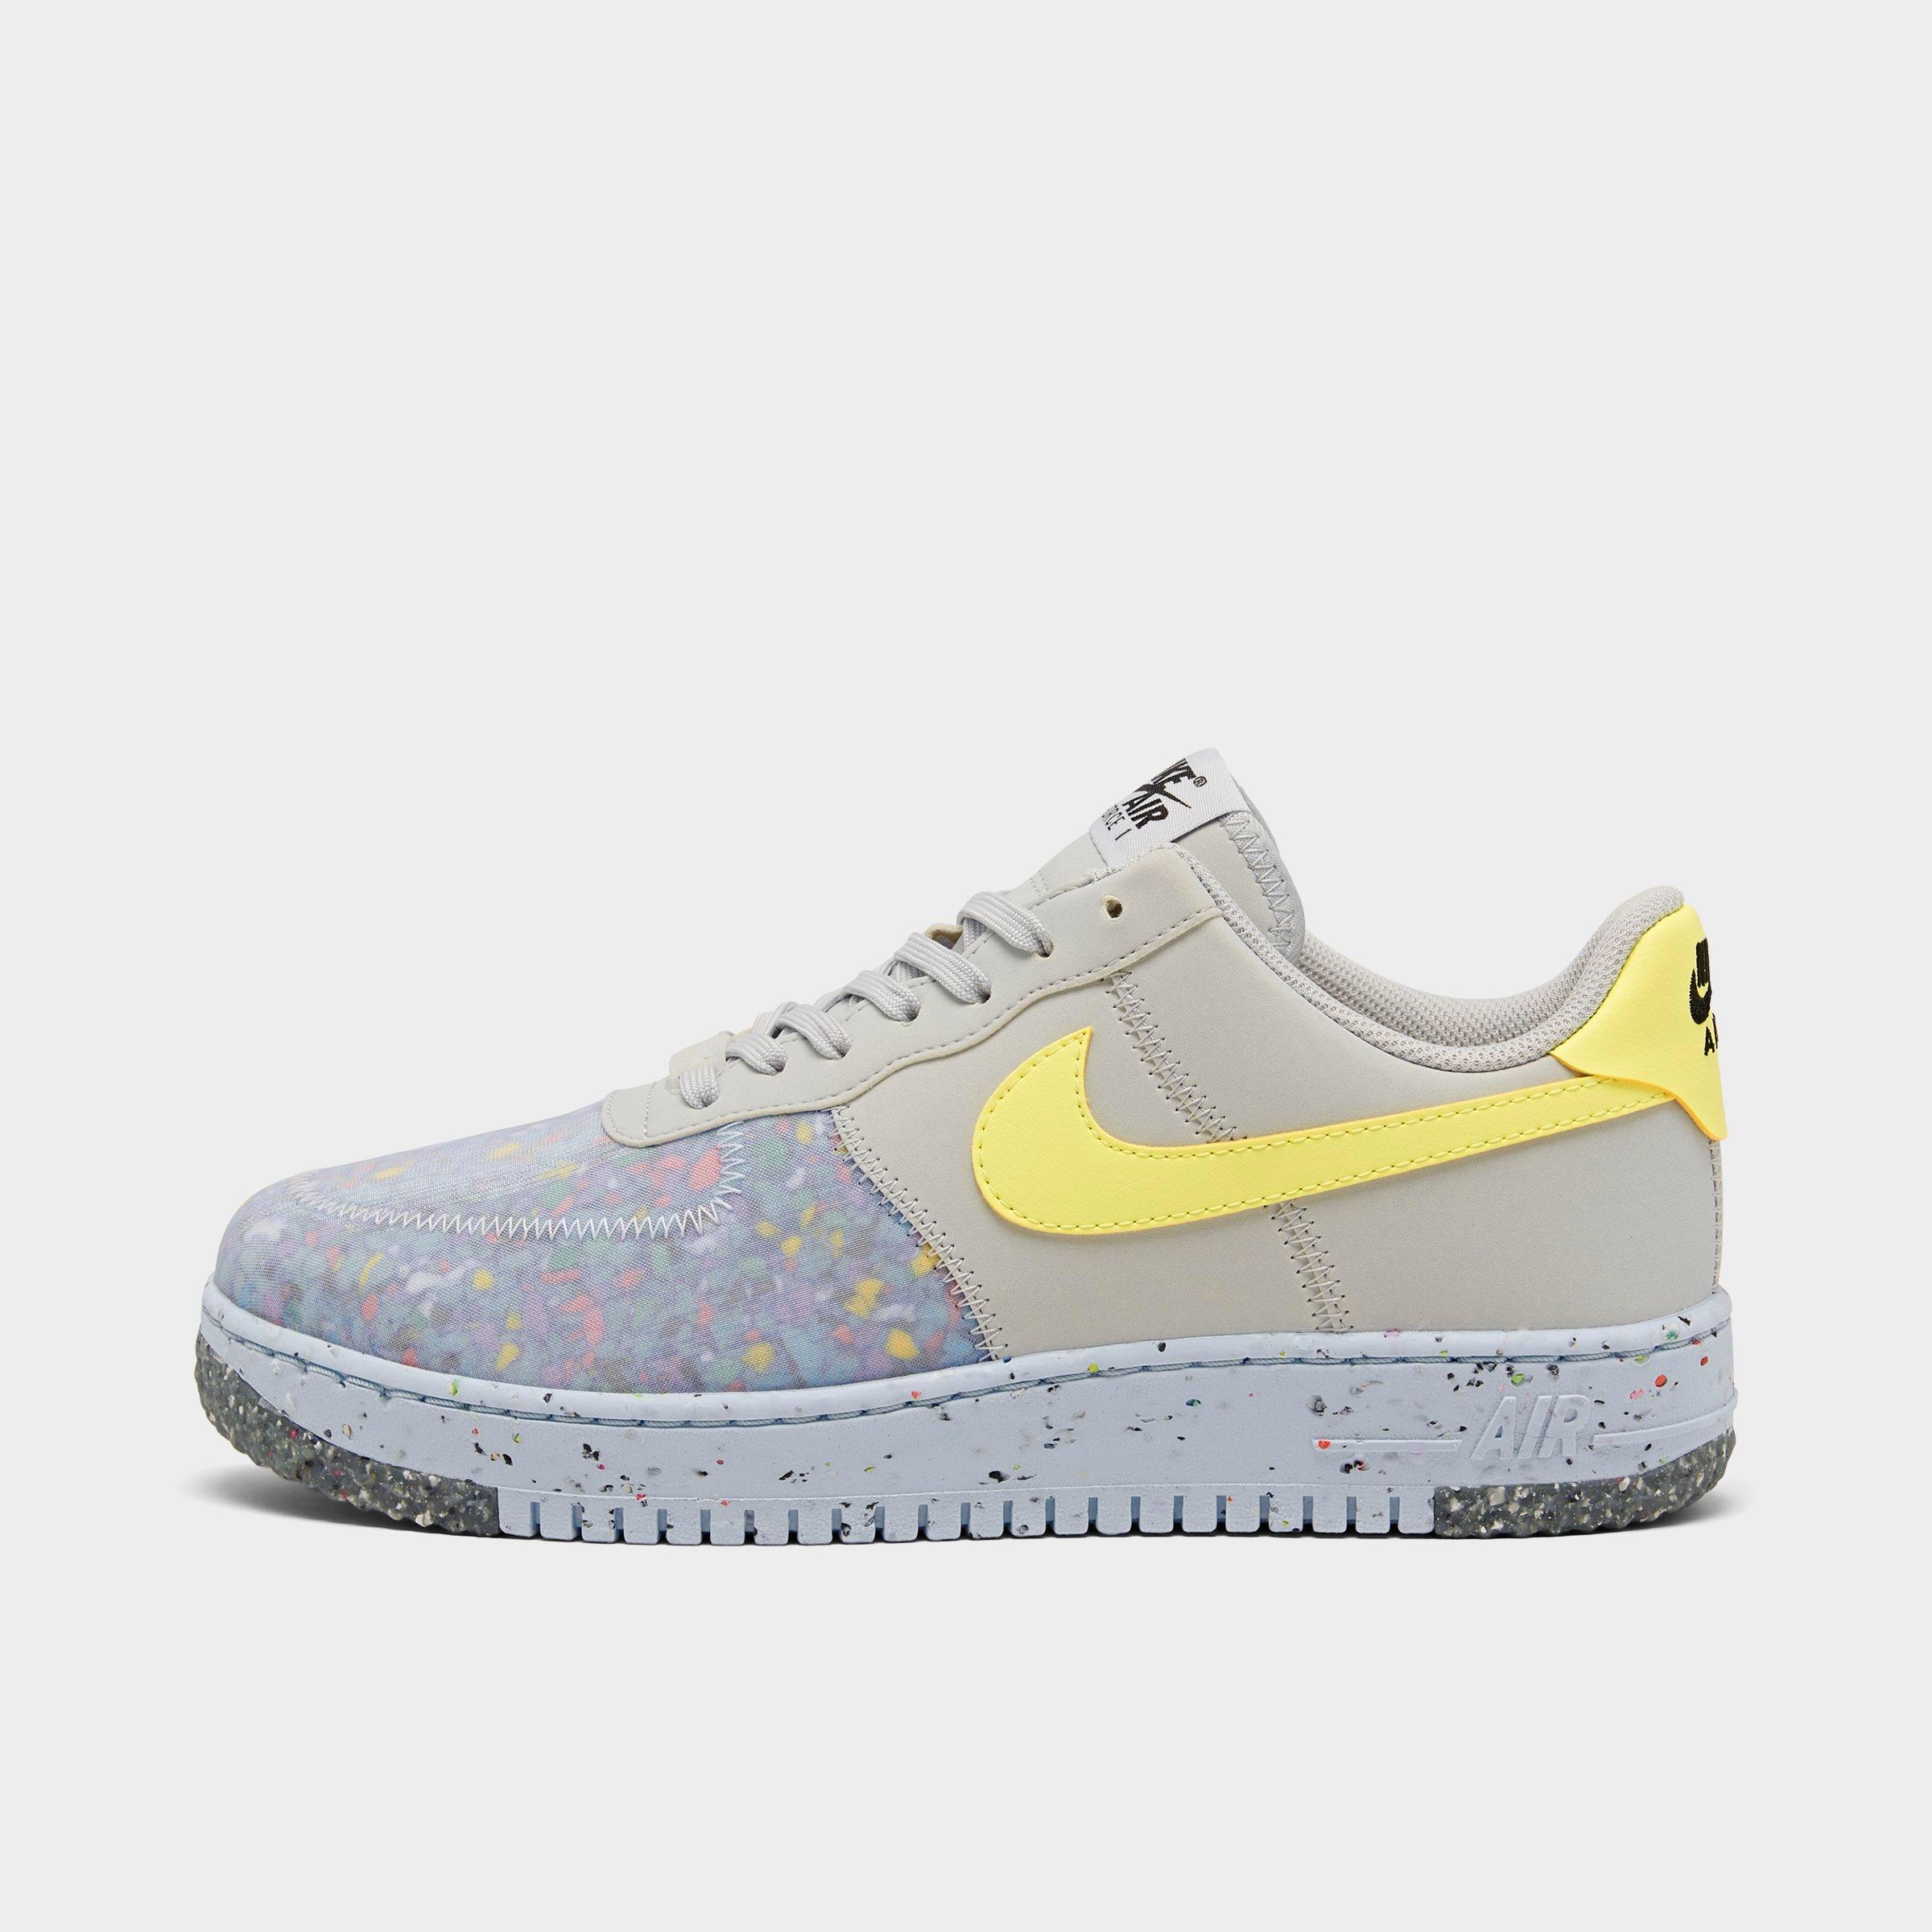 finish line mens air force 1